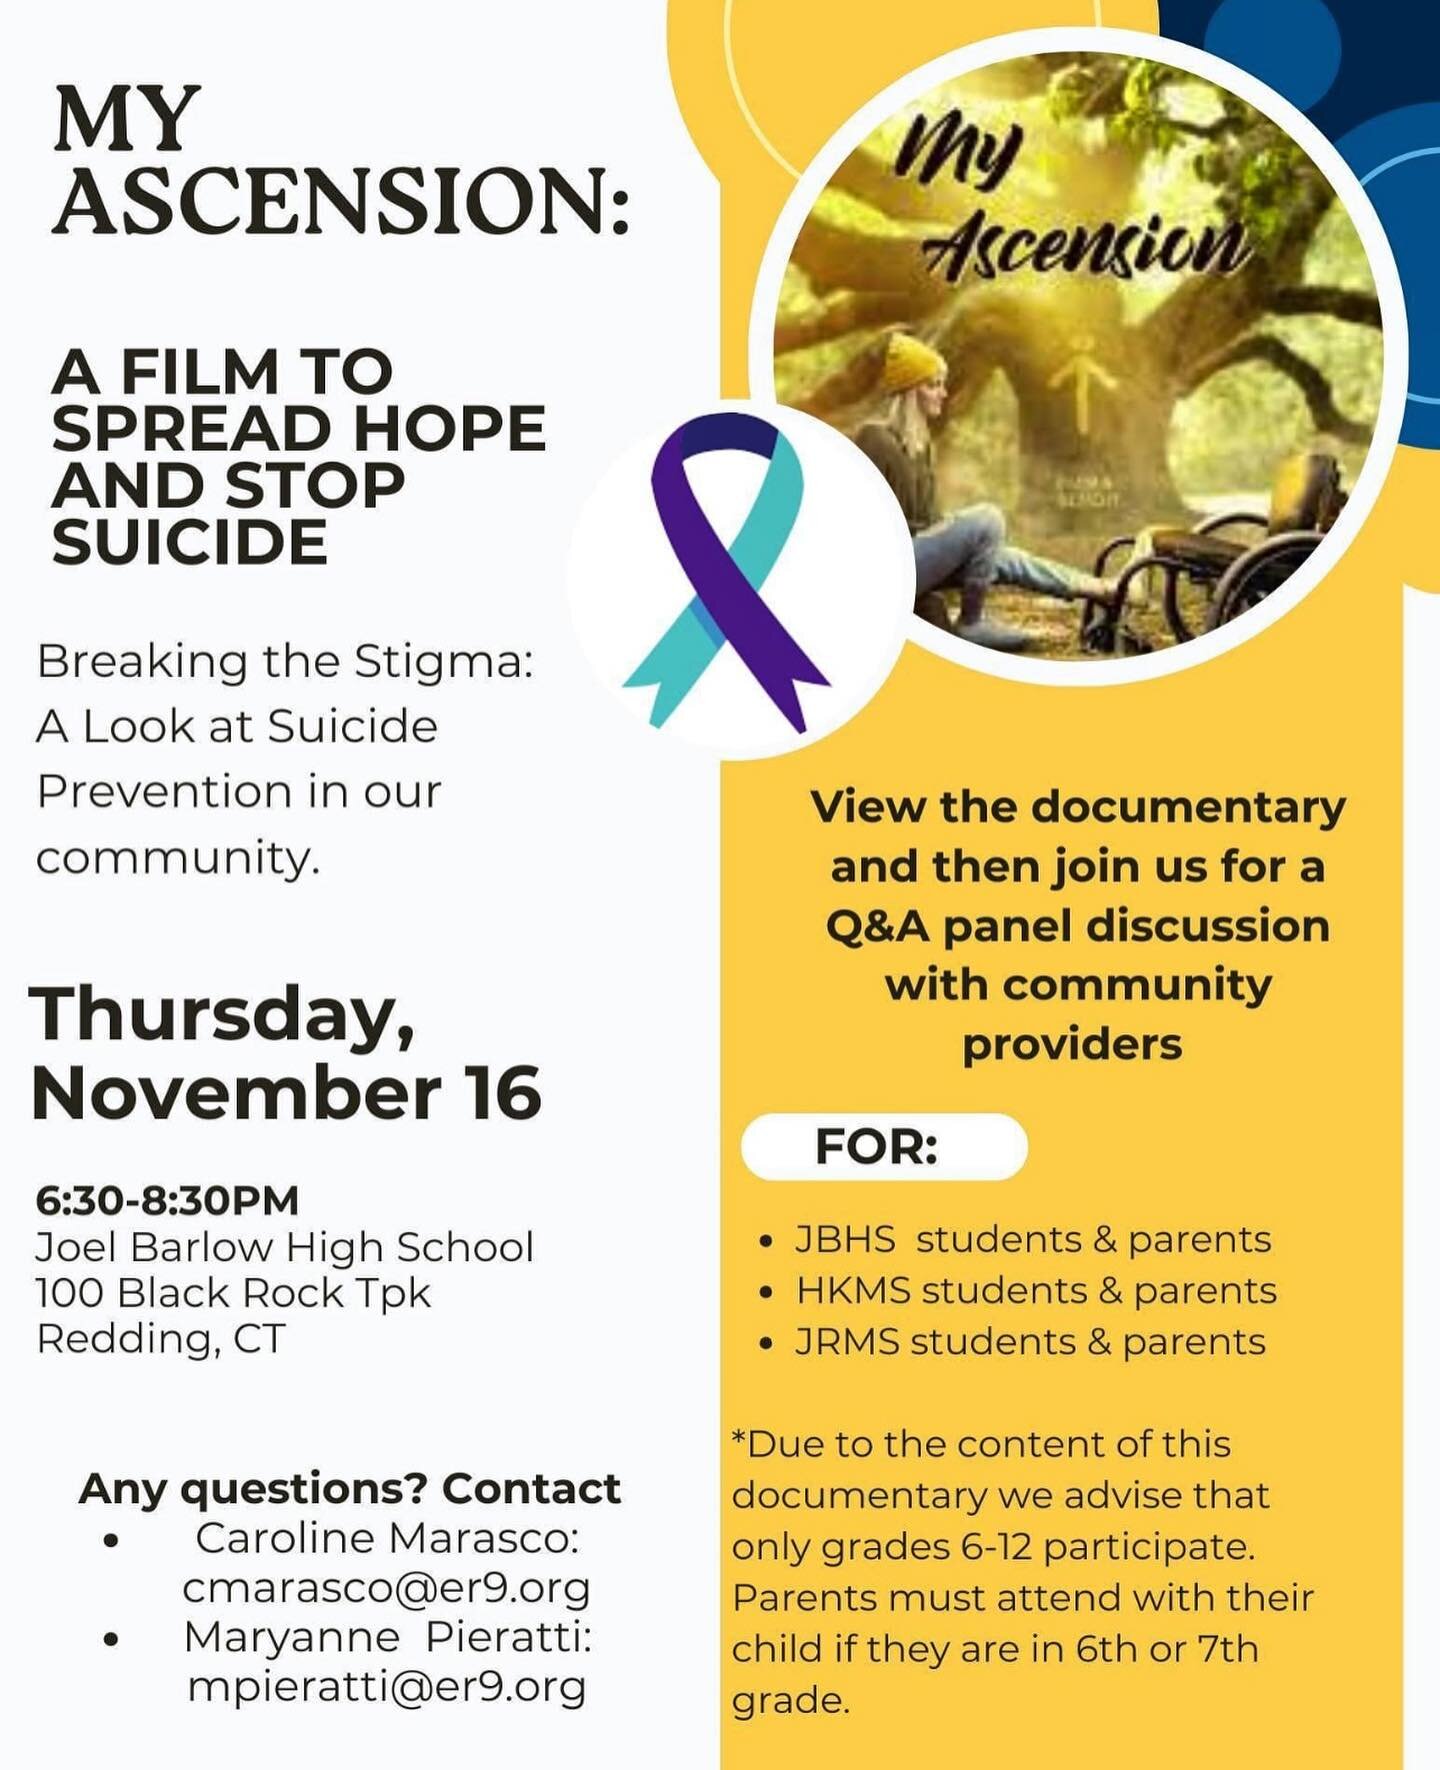 Psychotherapist Mary Dobson is pleased to panel an upcoming screening of @myascensionmovie on Thursday, November 16. If you are interested in bringing this film to your school or community, visit https://www.myascension.us/. Thank you to the team at 